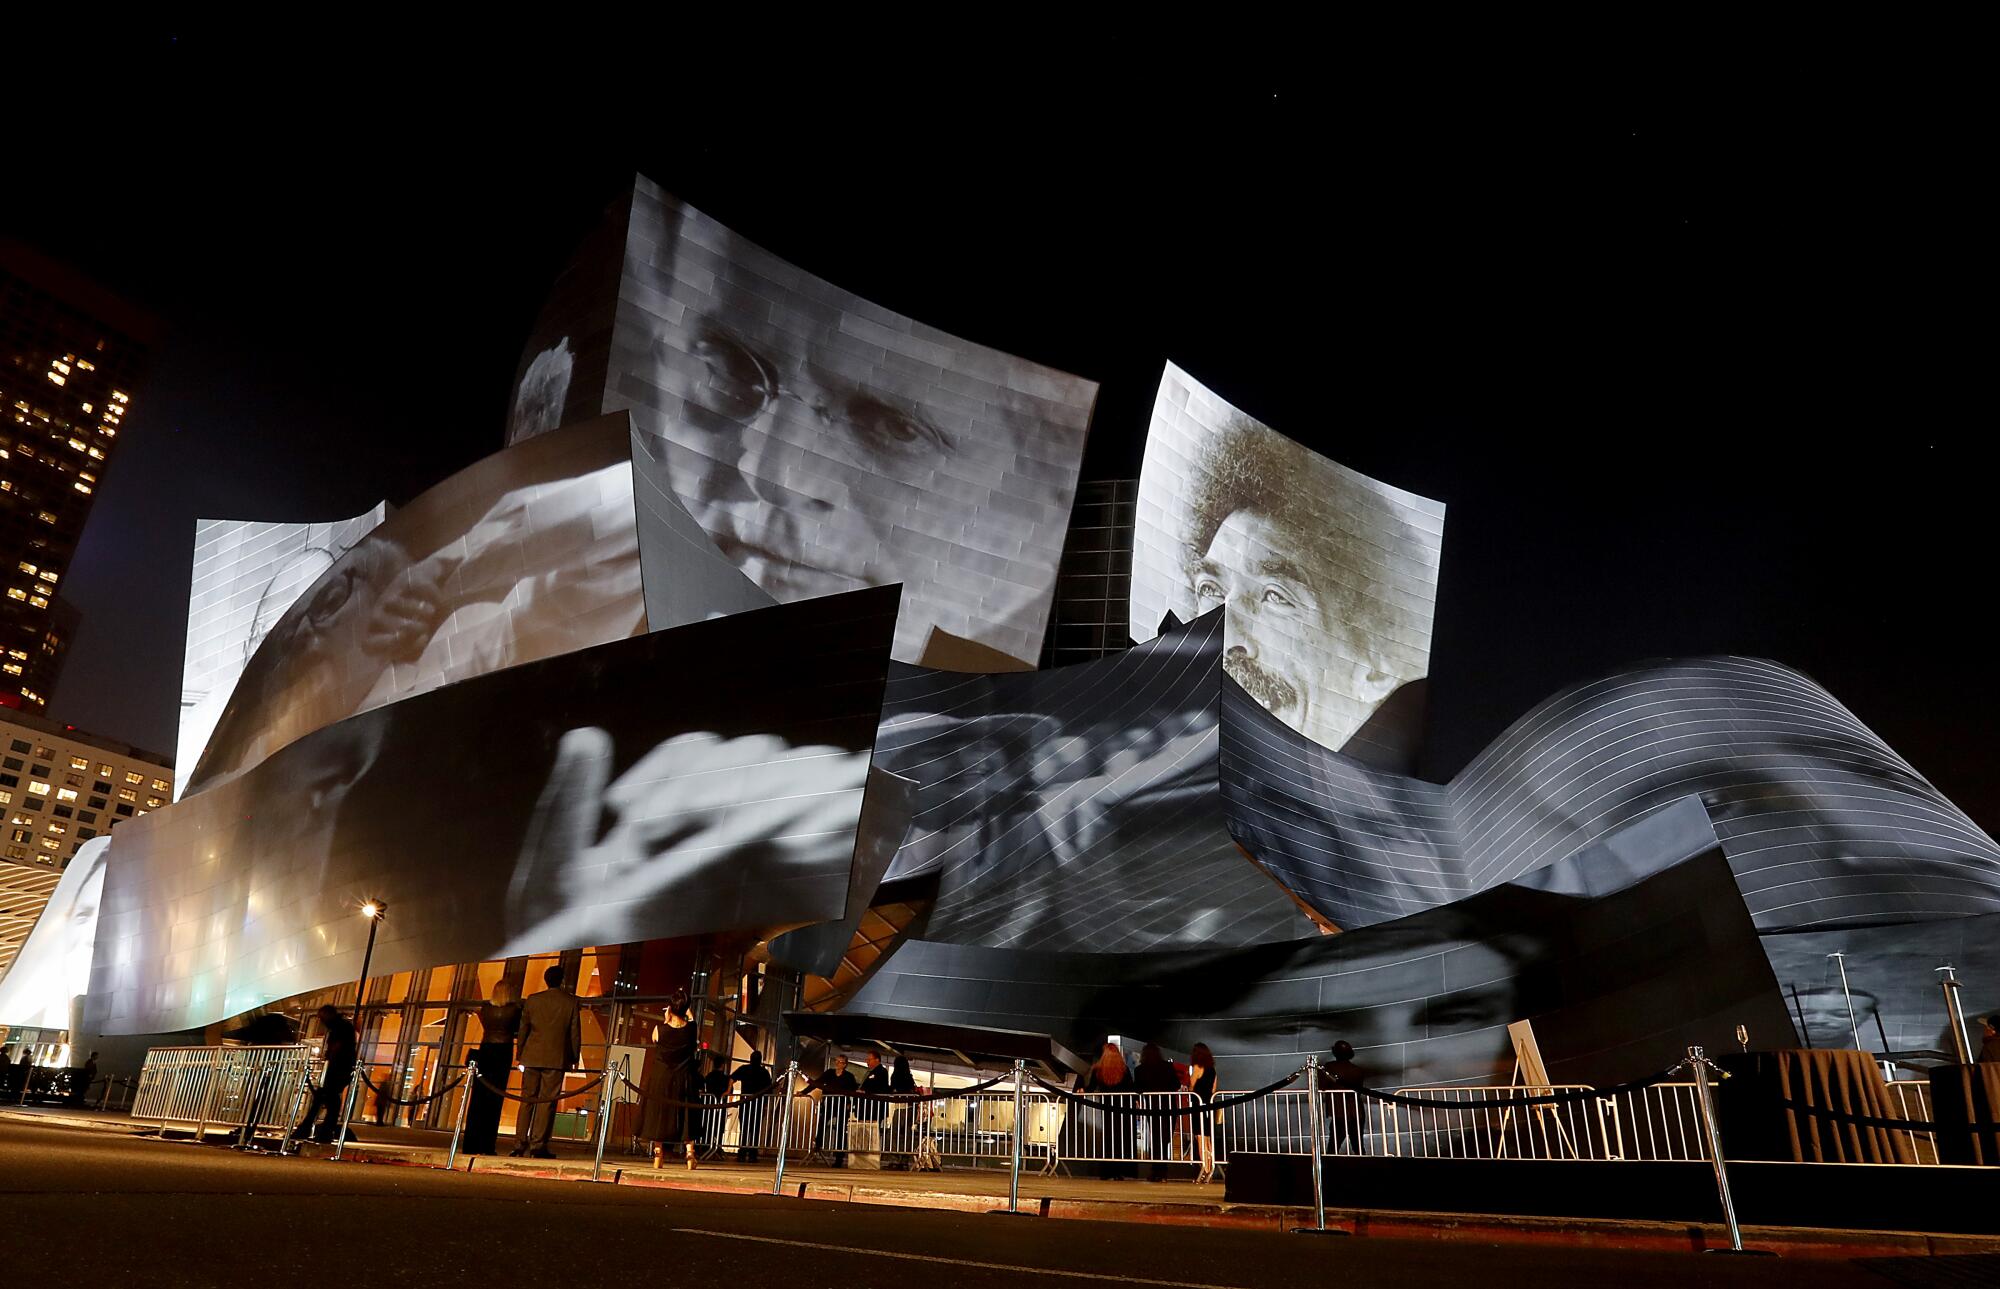 Giant faces are projected onto the exterior of Disney Hall for the L.A. Phil's centennial in 2018.